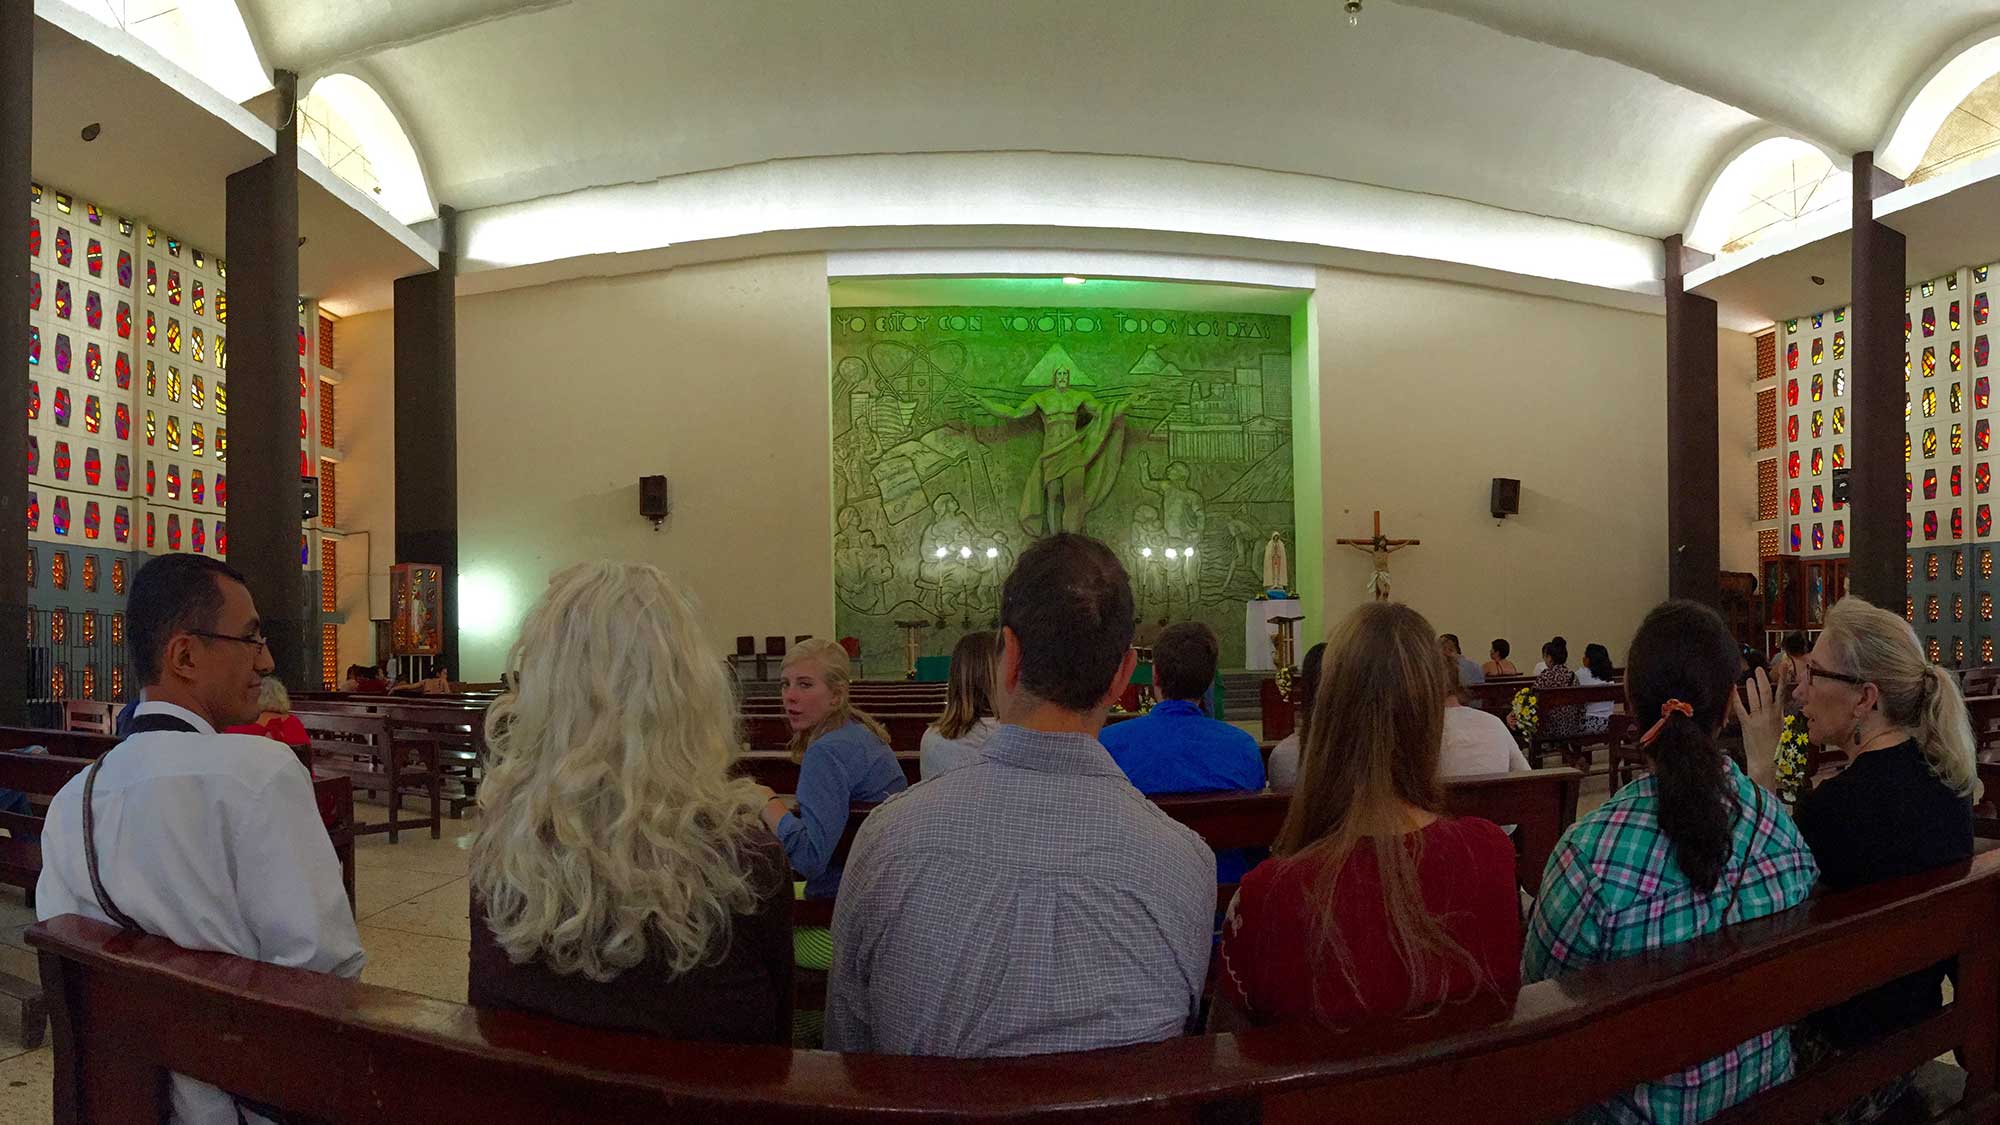 Seattle University students and faculty attend mass in church